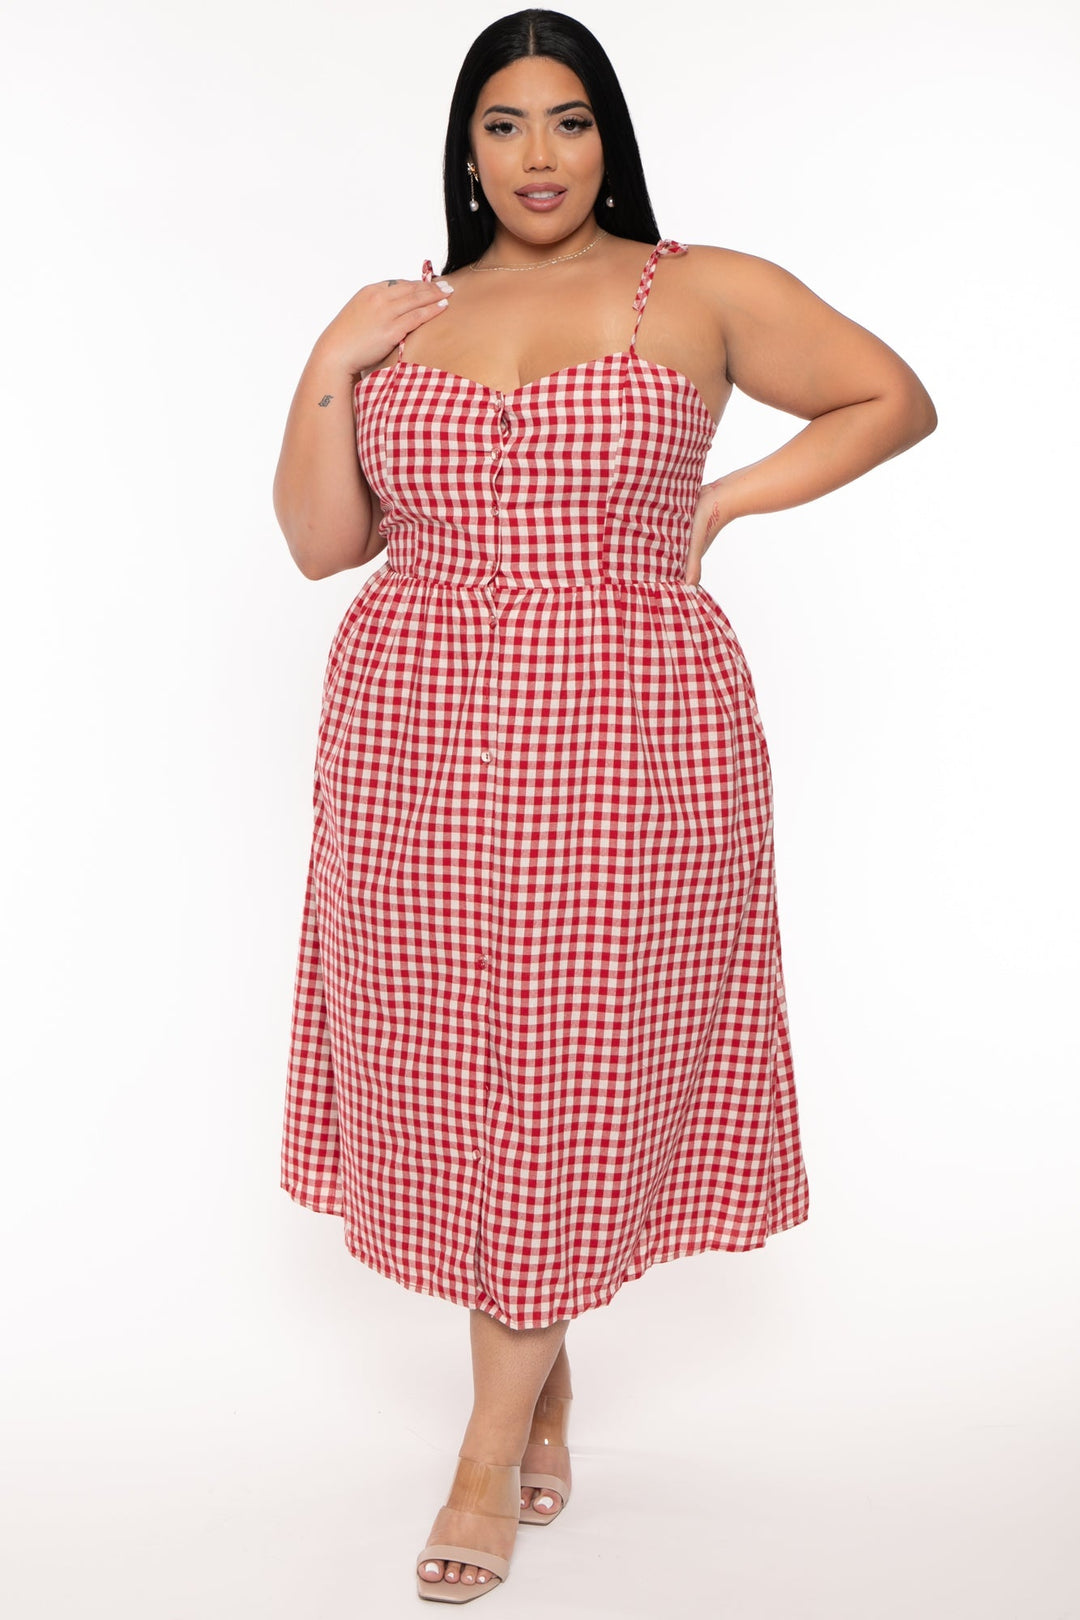 Jade by Jane Dresses Plus Size Delmy Gingham Midi Dress -Red